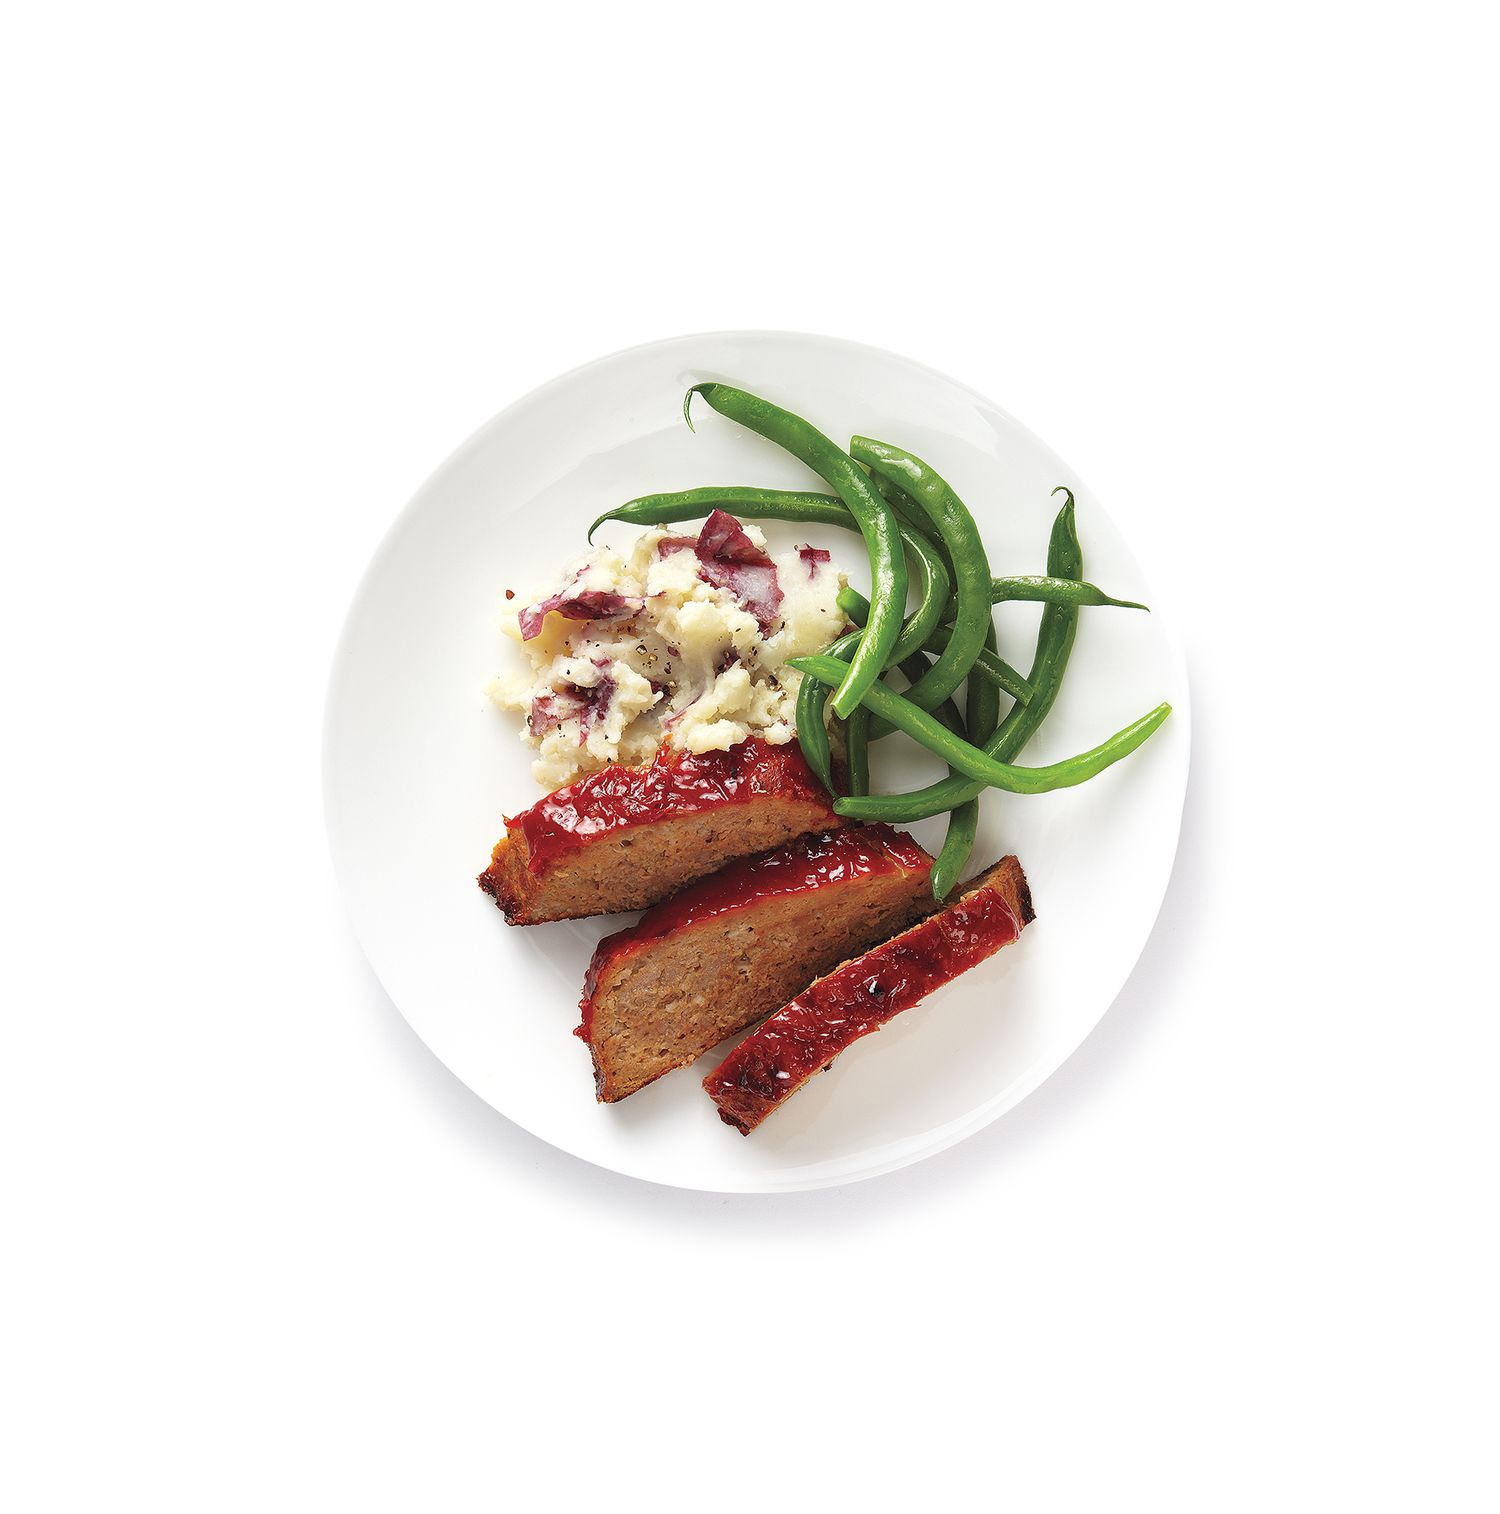 Turkey meat loaf with mashed potatoes and green beans served on a plate.